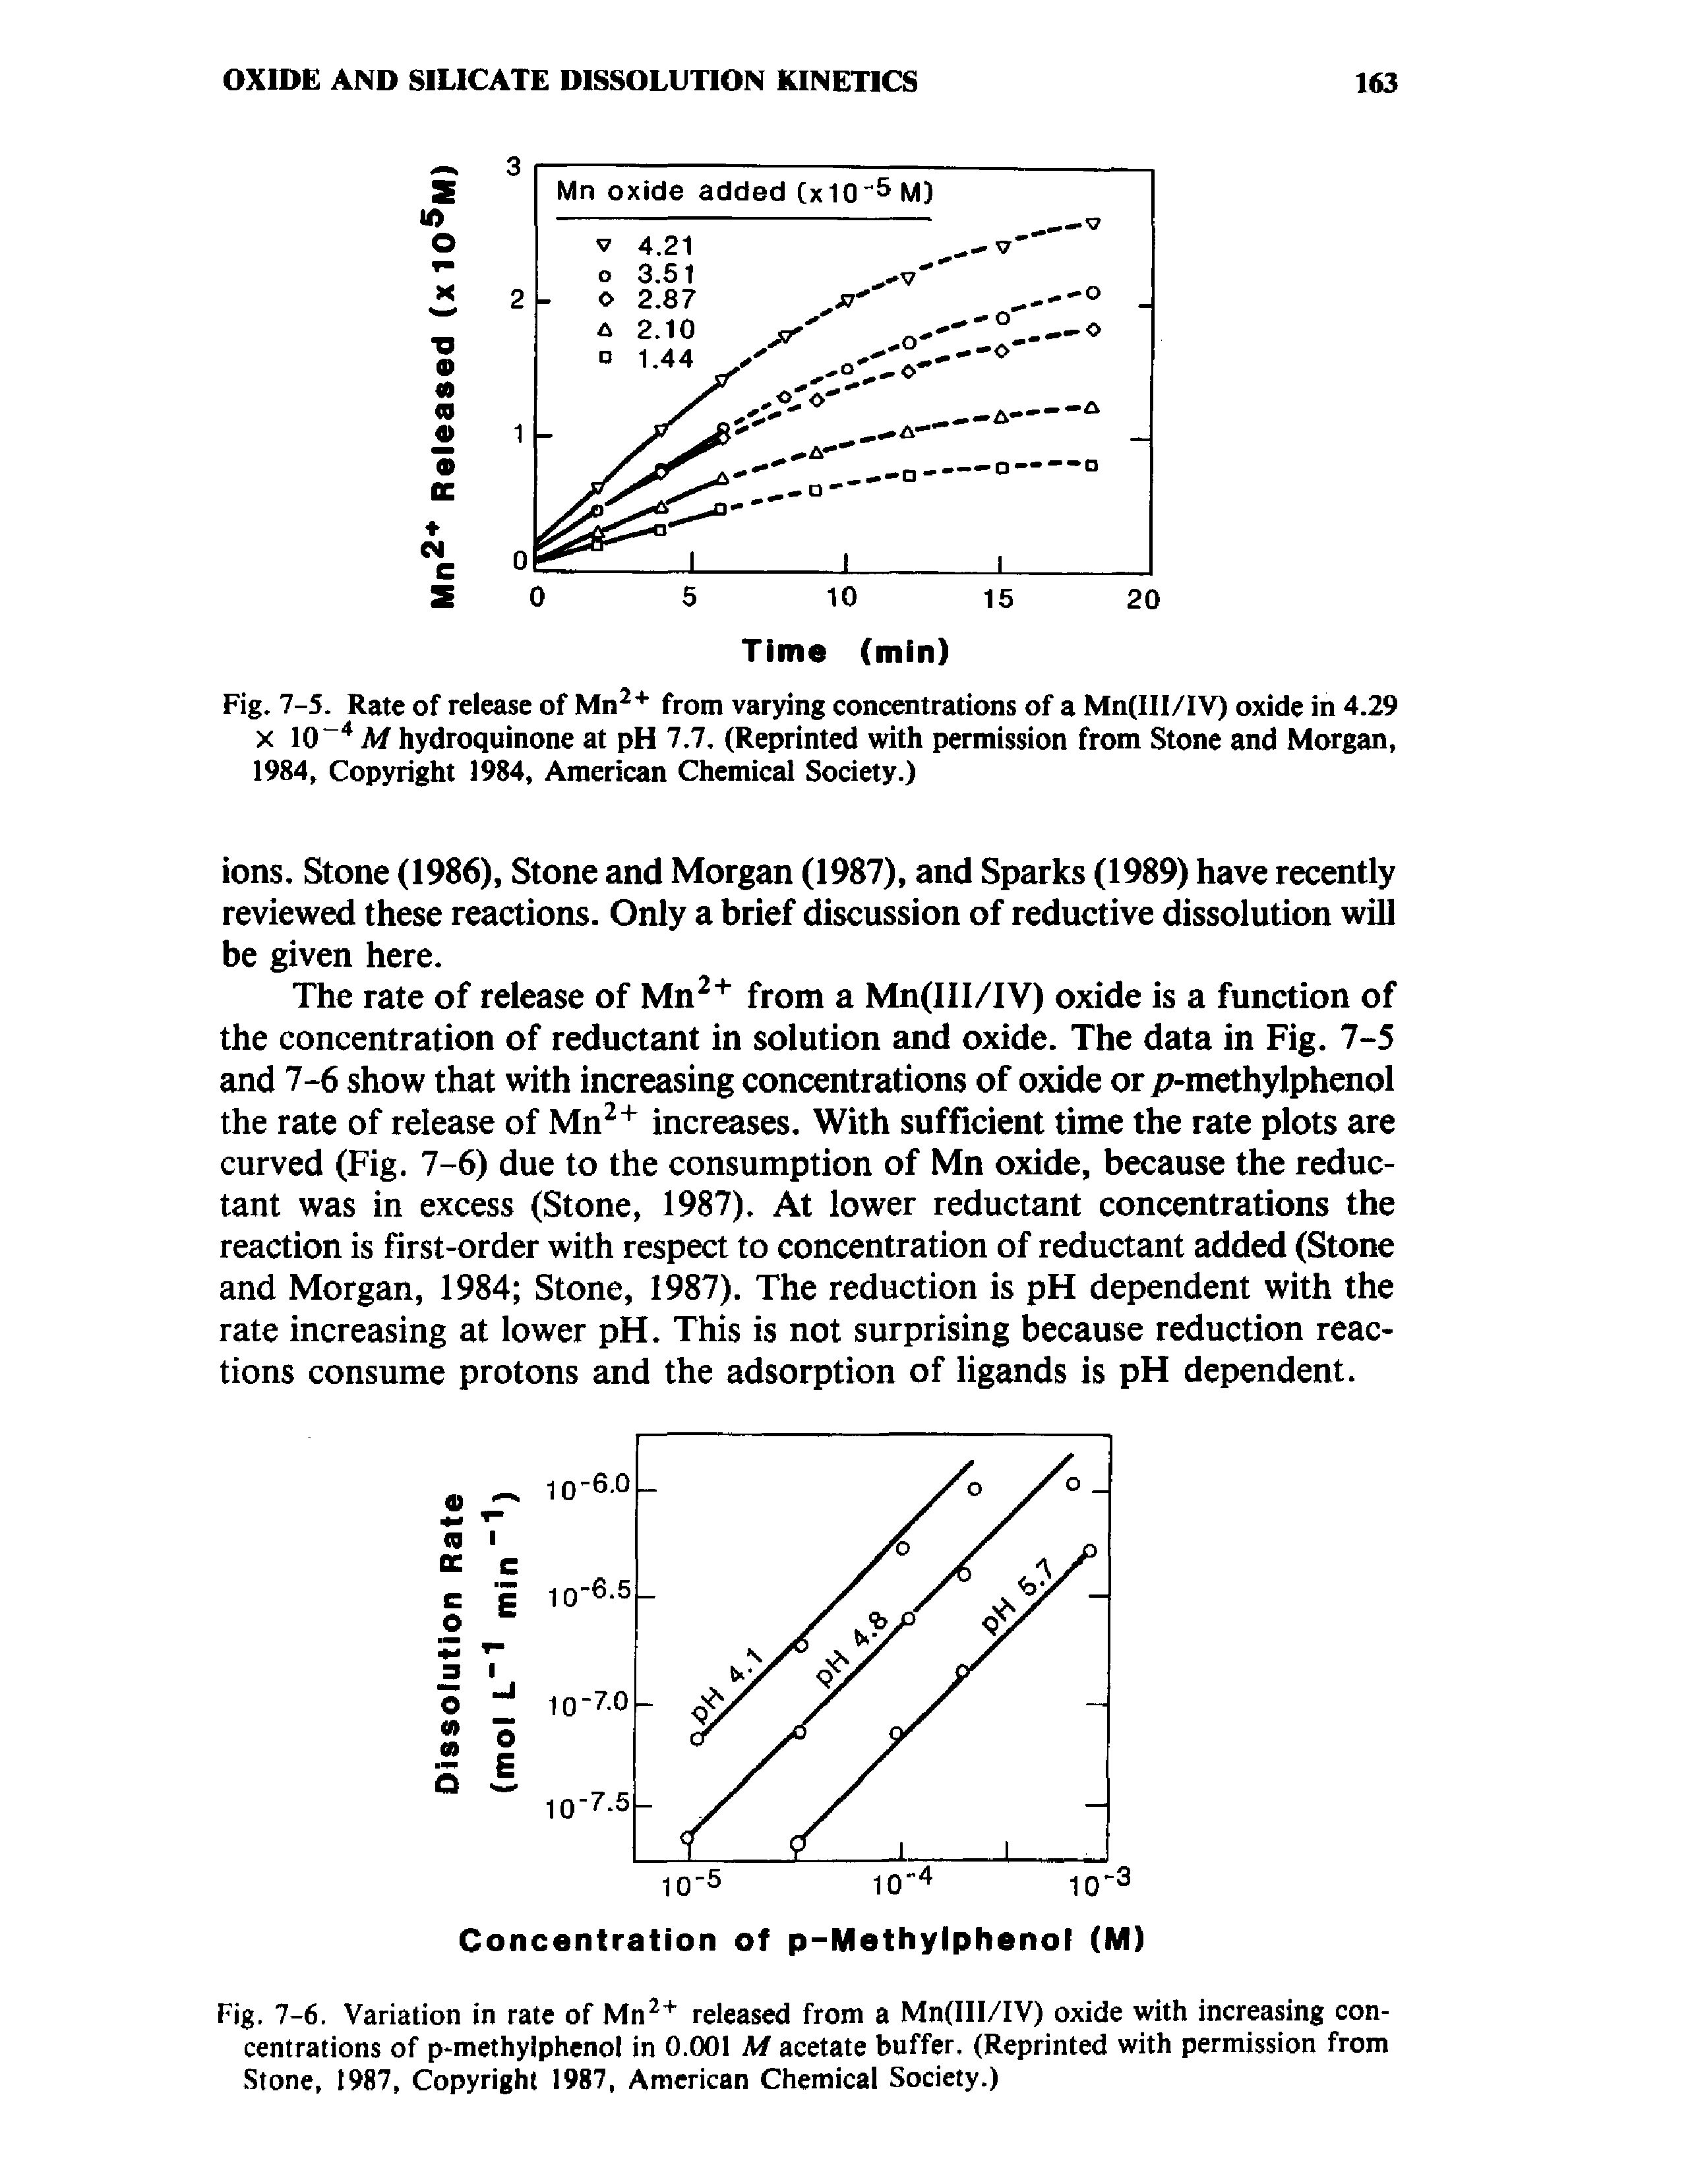 Fig. 7-6. Variation in rate of Mn released from a Mn(III/IV) oxide with increasing concentrations of p-methyiphenol in 0.001 M acetate buffer. (Reprinted with permission from. Stone, 1987, Copyright 1987, American Chemical Society.)...